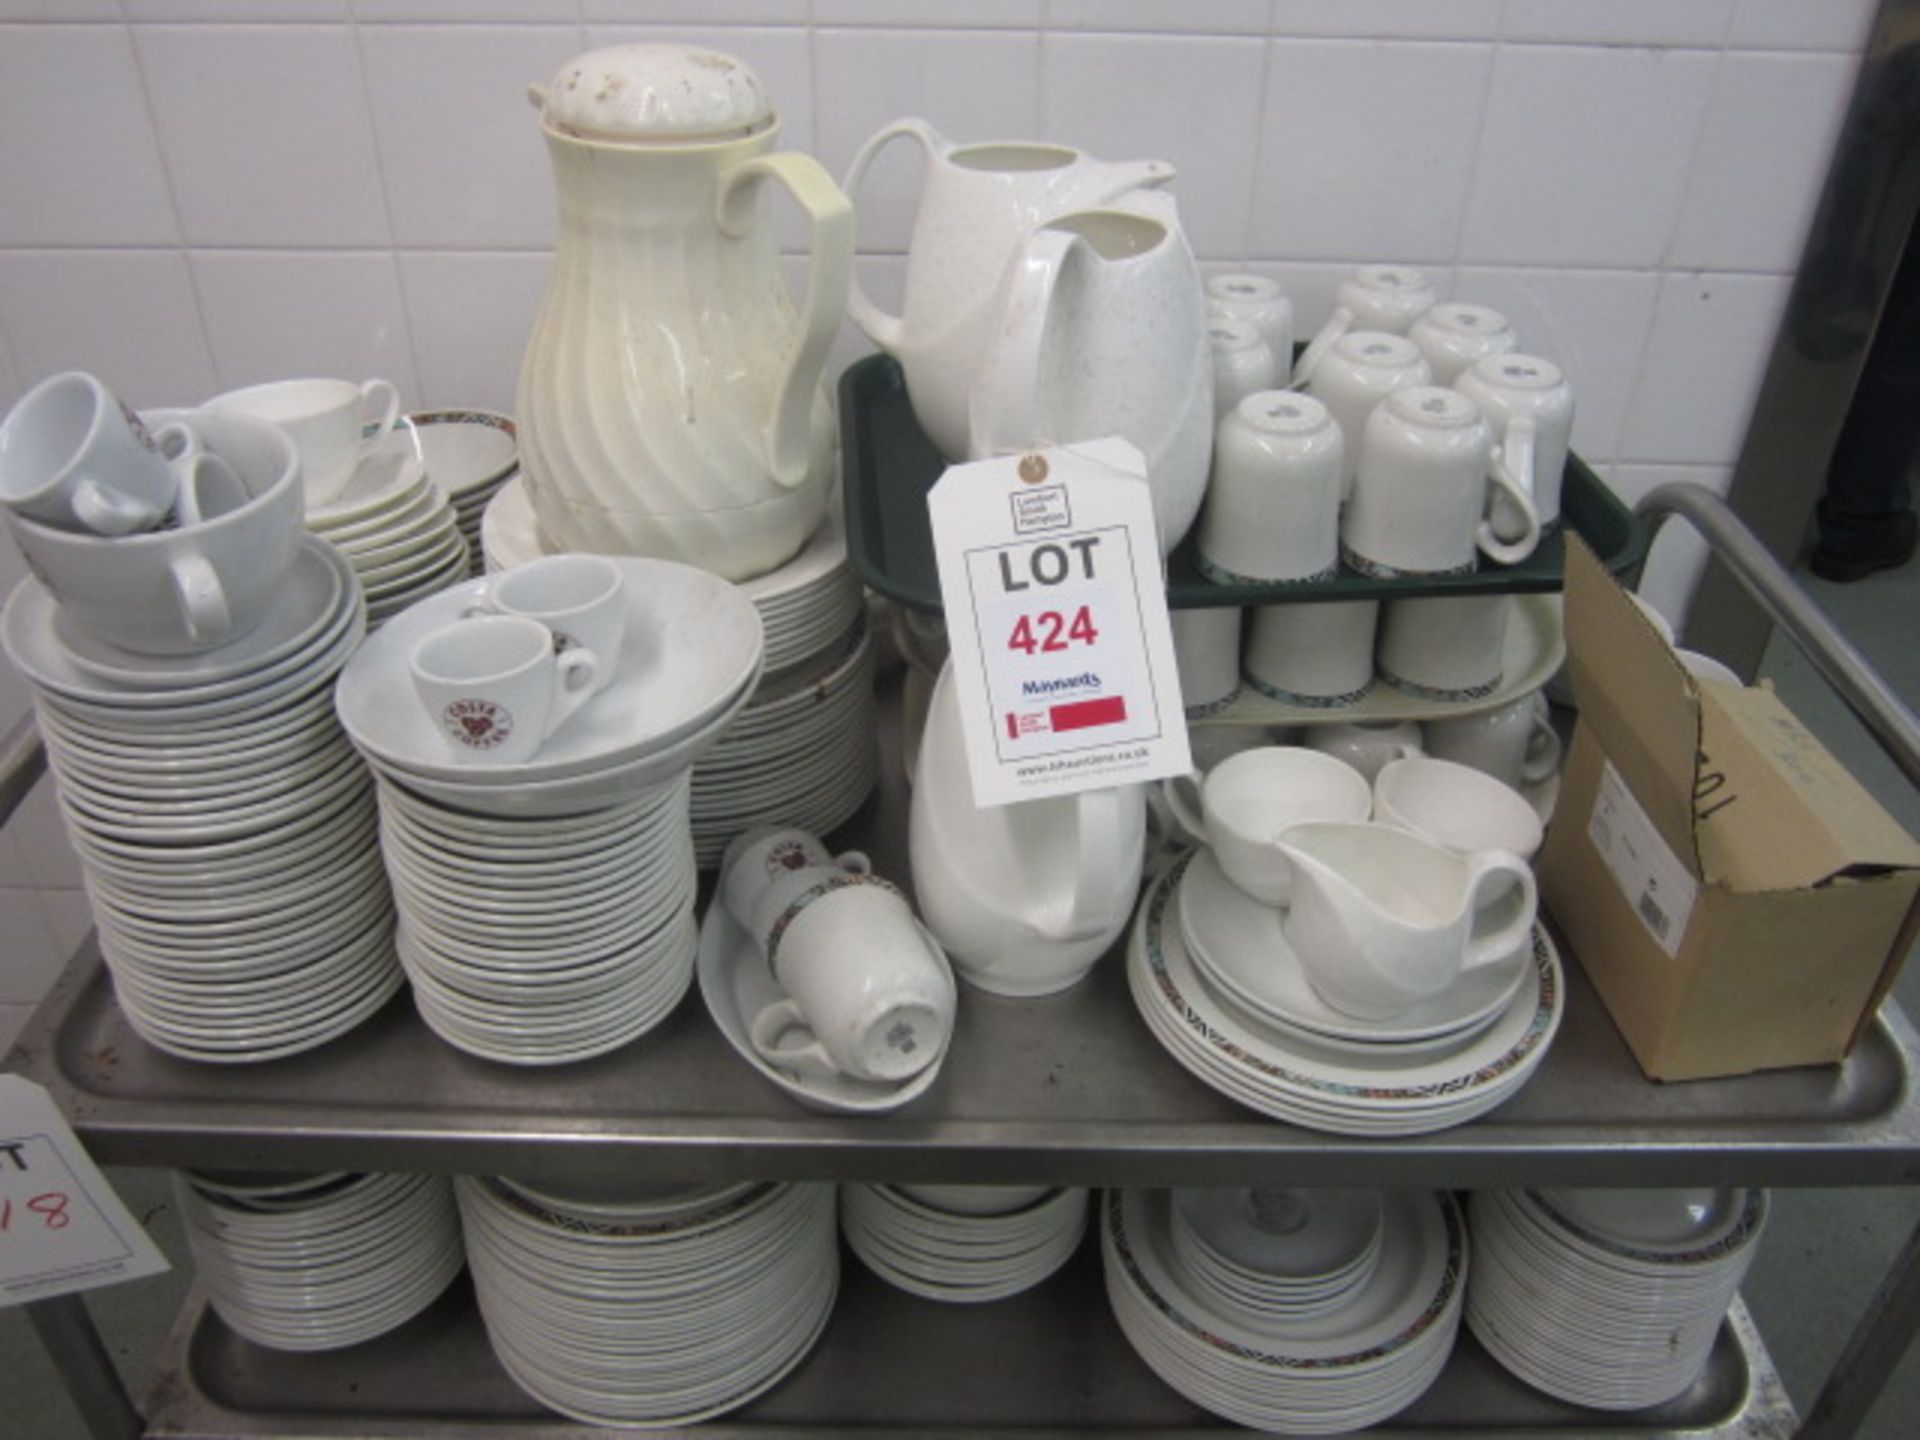 Quantity of assorted chinaware including plates, cups, saucers, jugs, serving bowls, etc.,